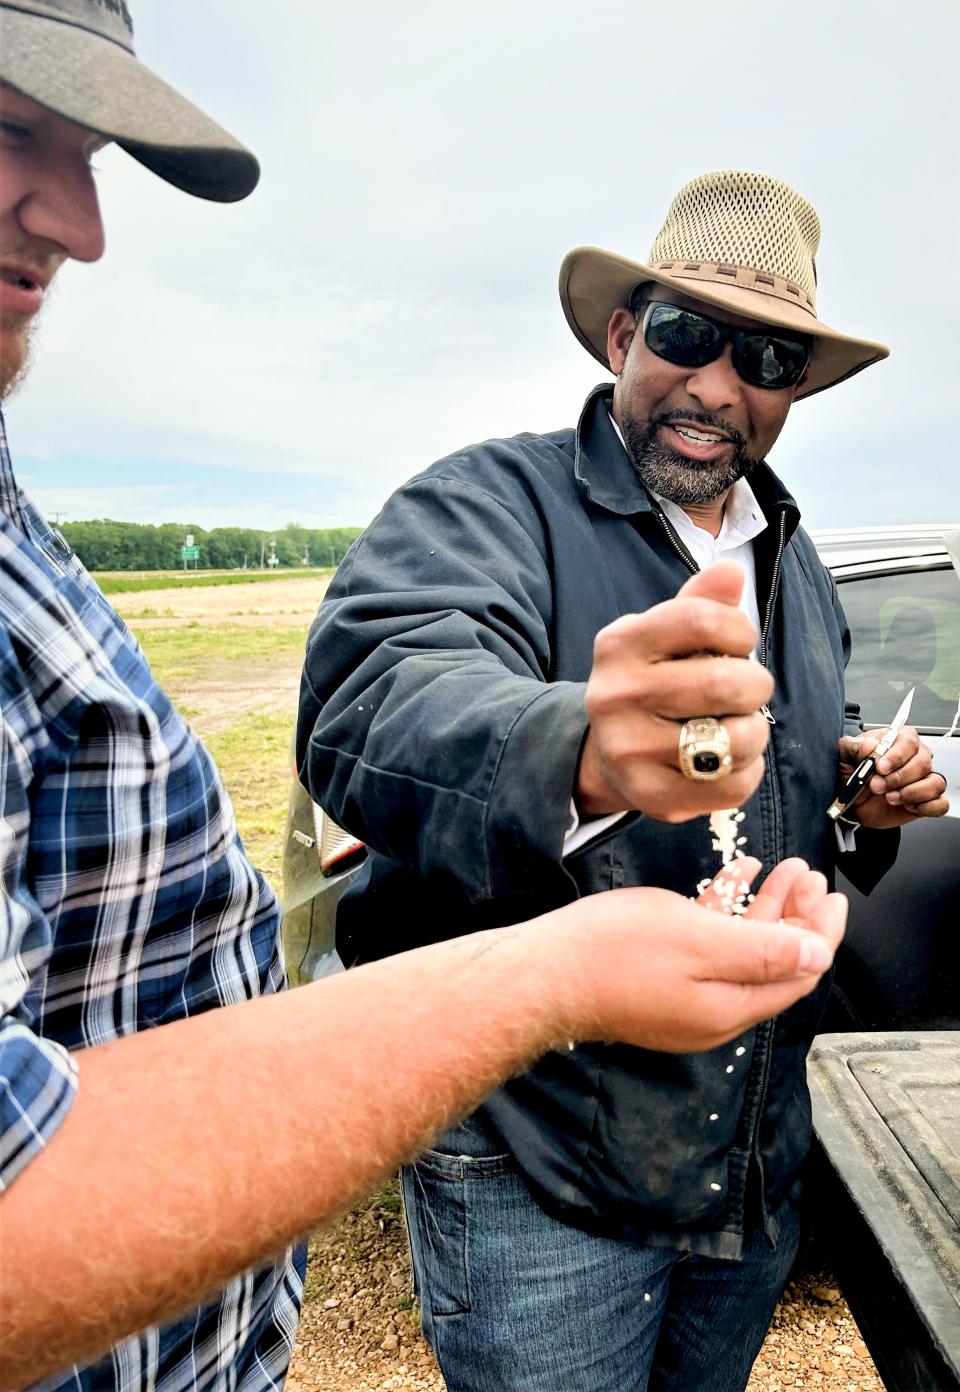 PJ Haynie shows off some of his rice to a worker on the farm.